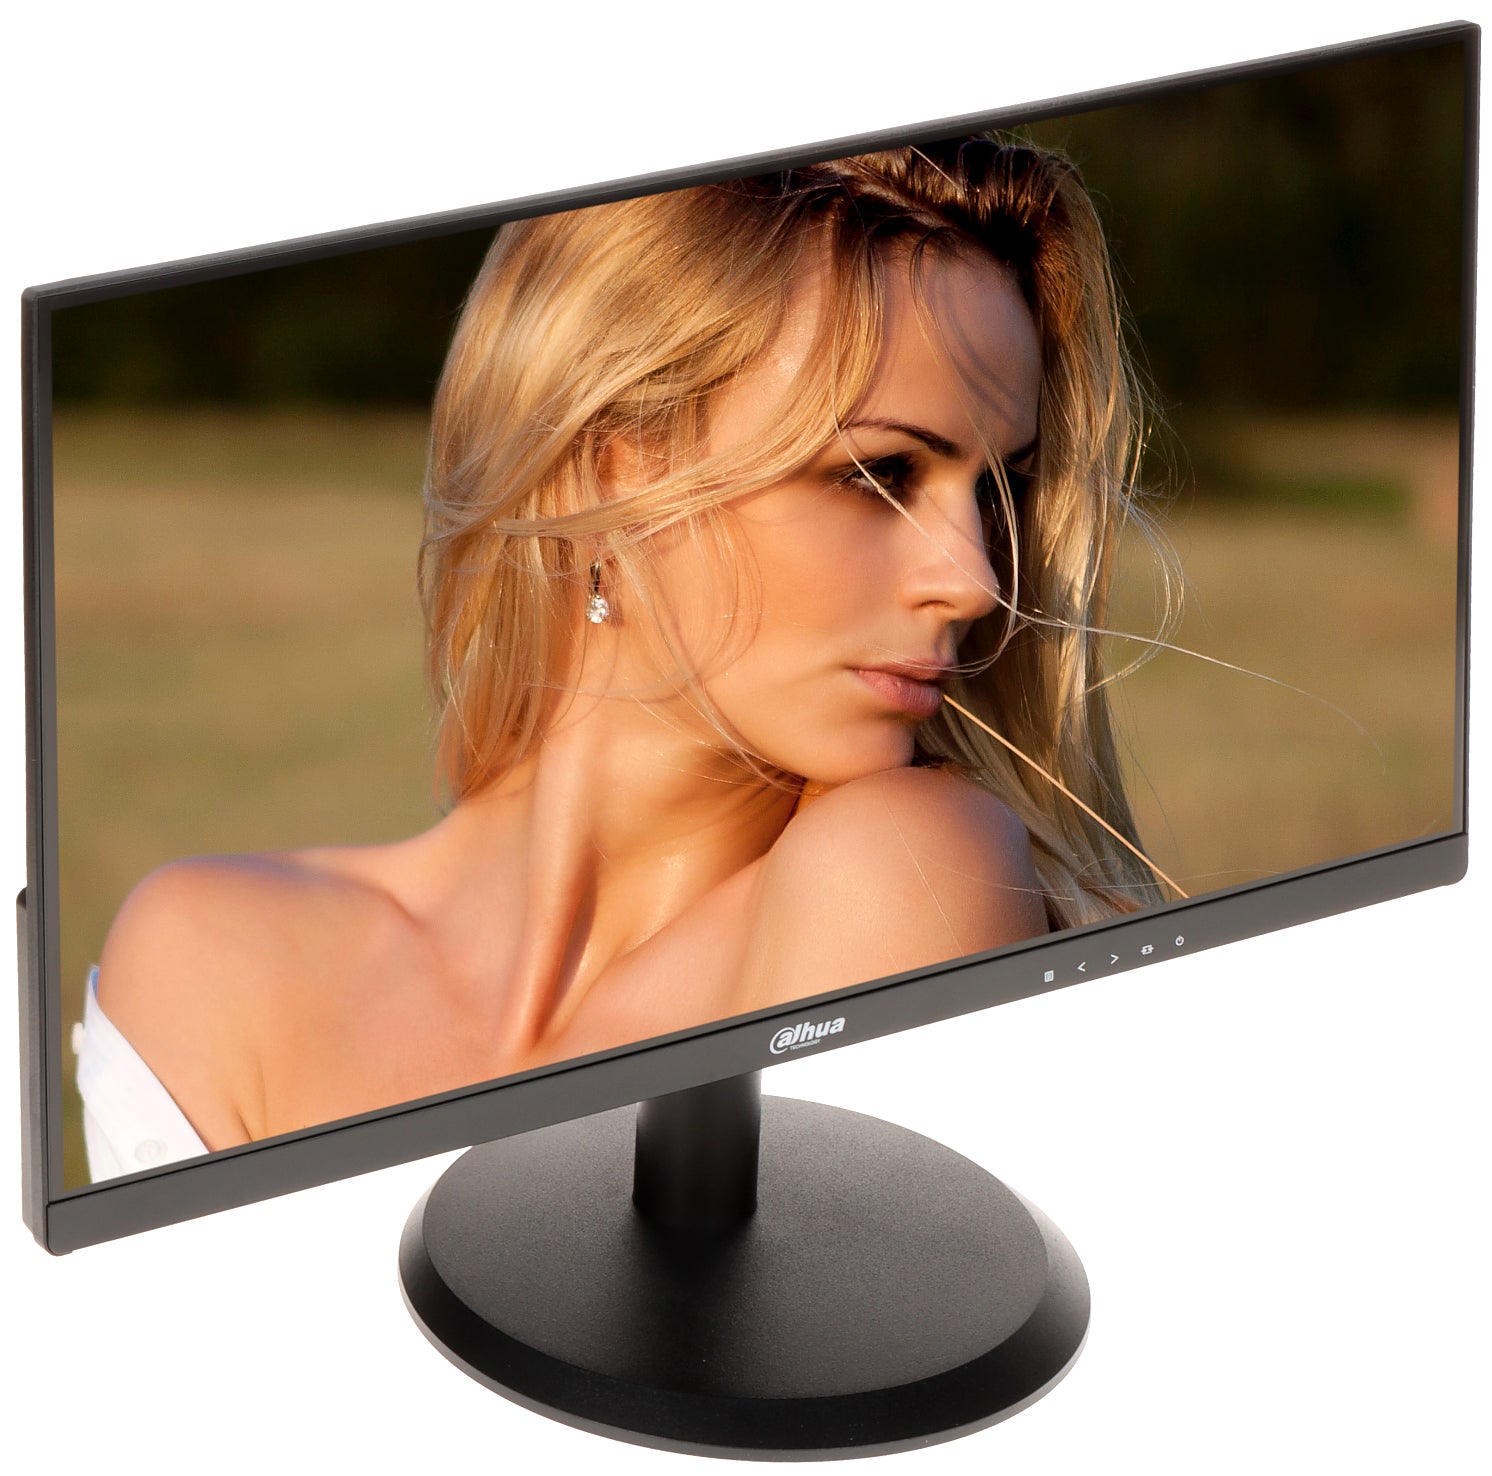 Dahua 21.45" LED Monitor Full HD With Speaker DHI-LM22-H200